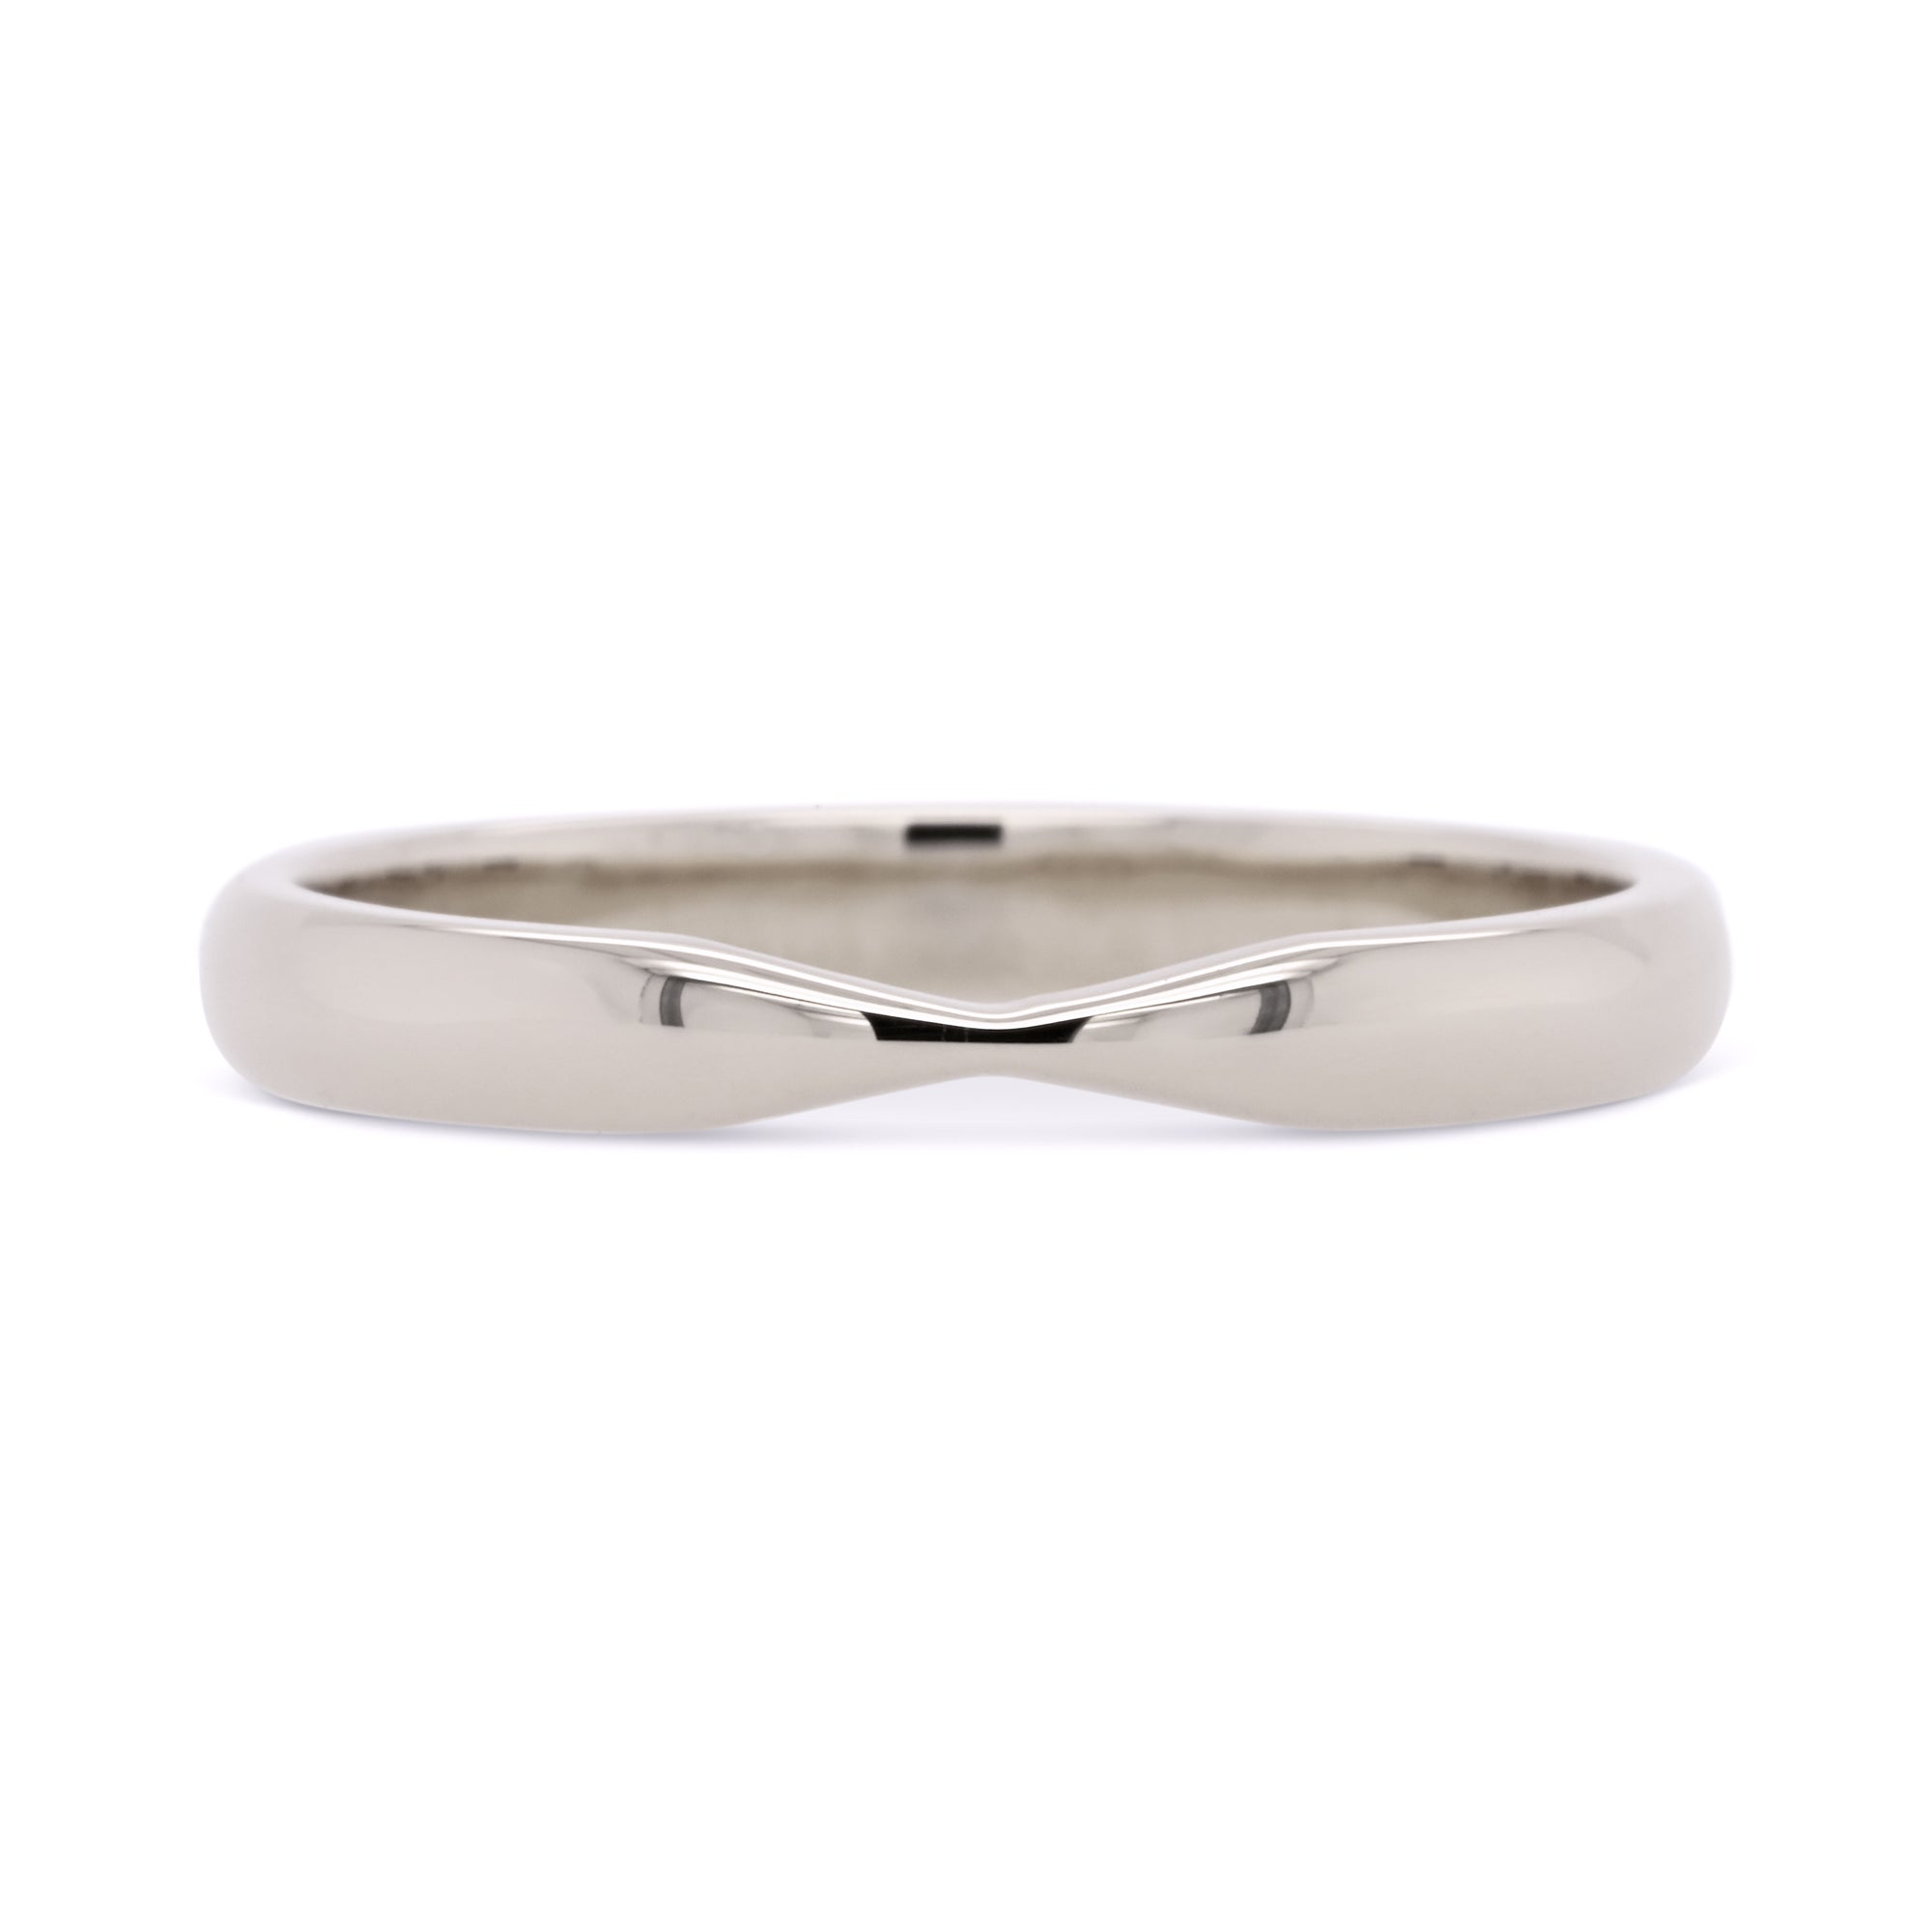 Gently tapered nesting wedding band in 14K white gold